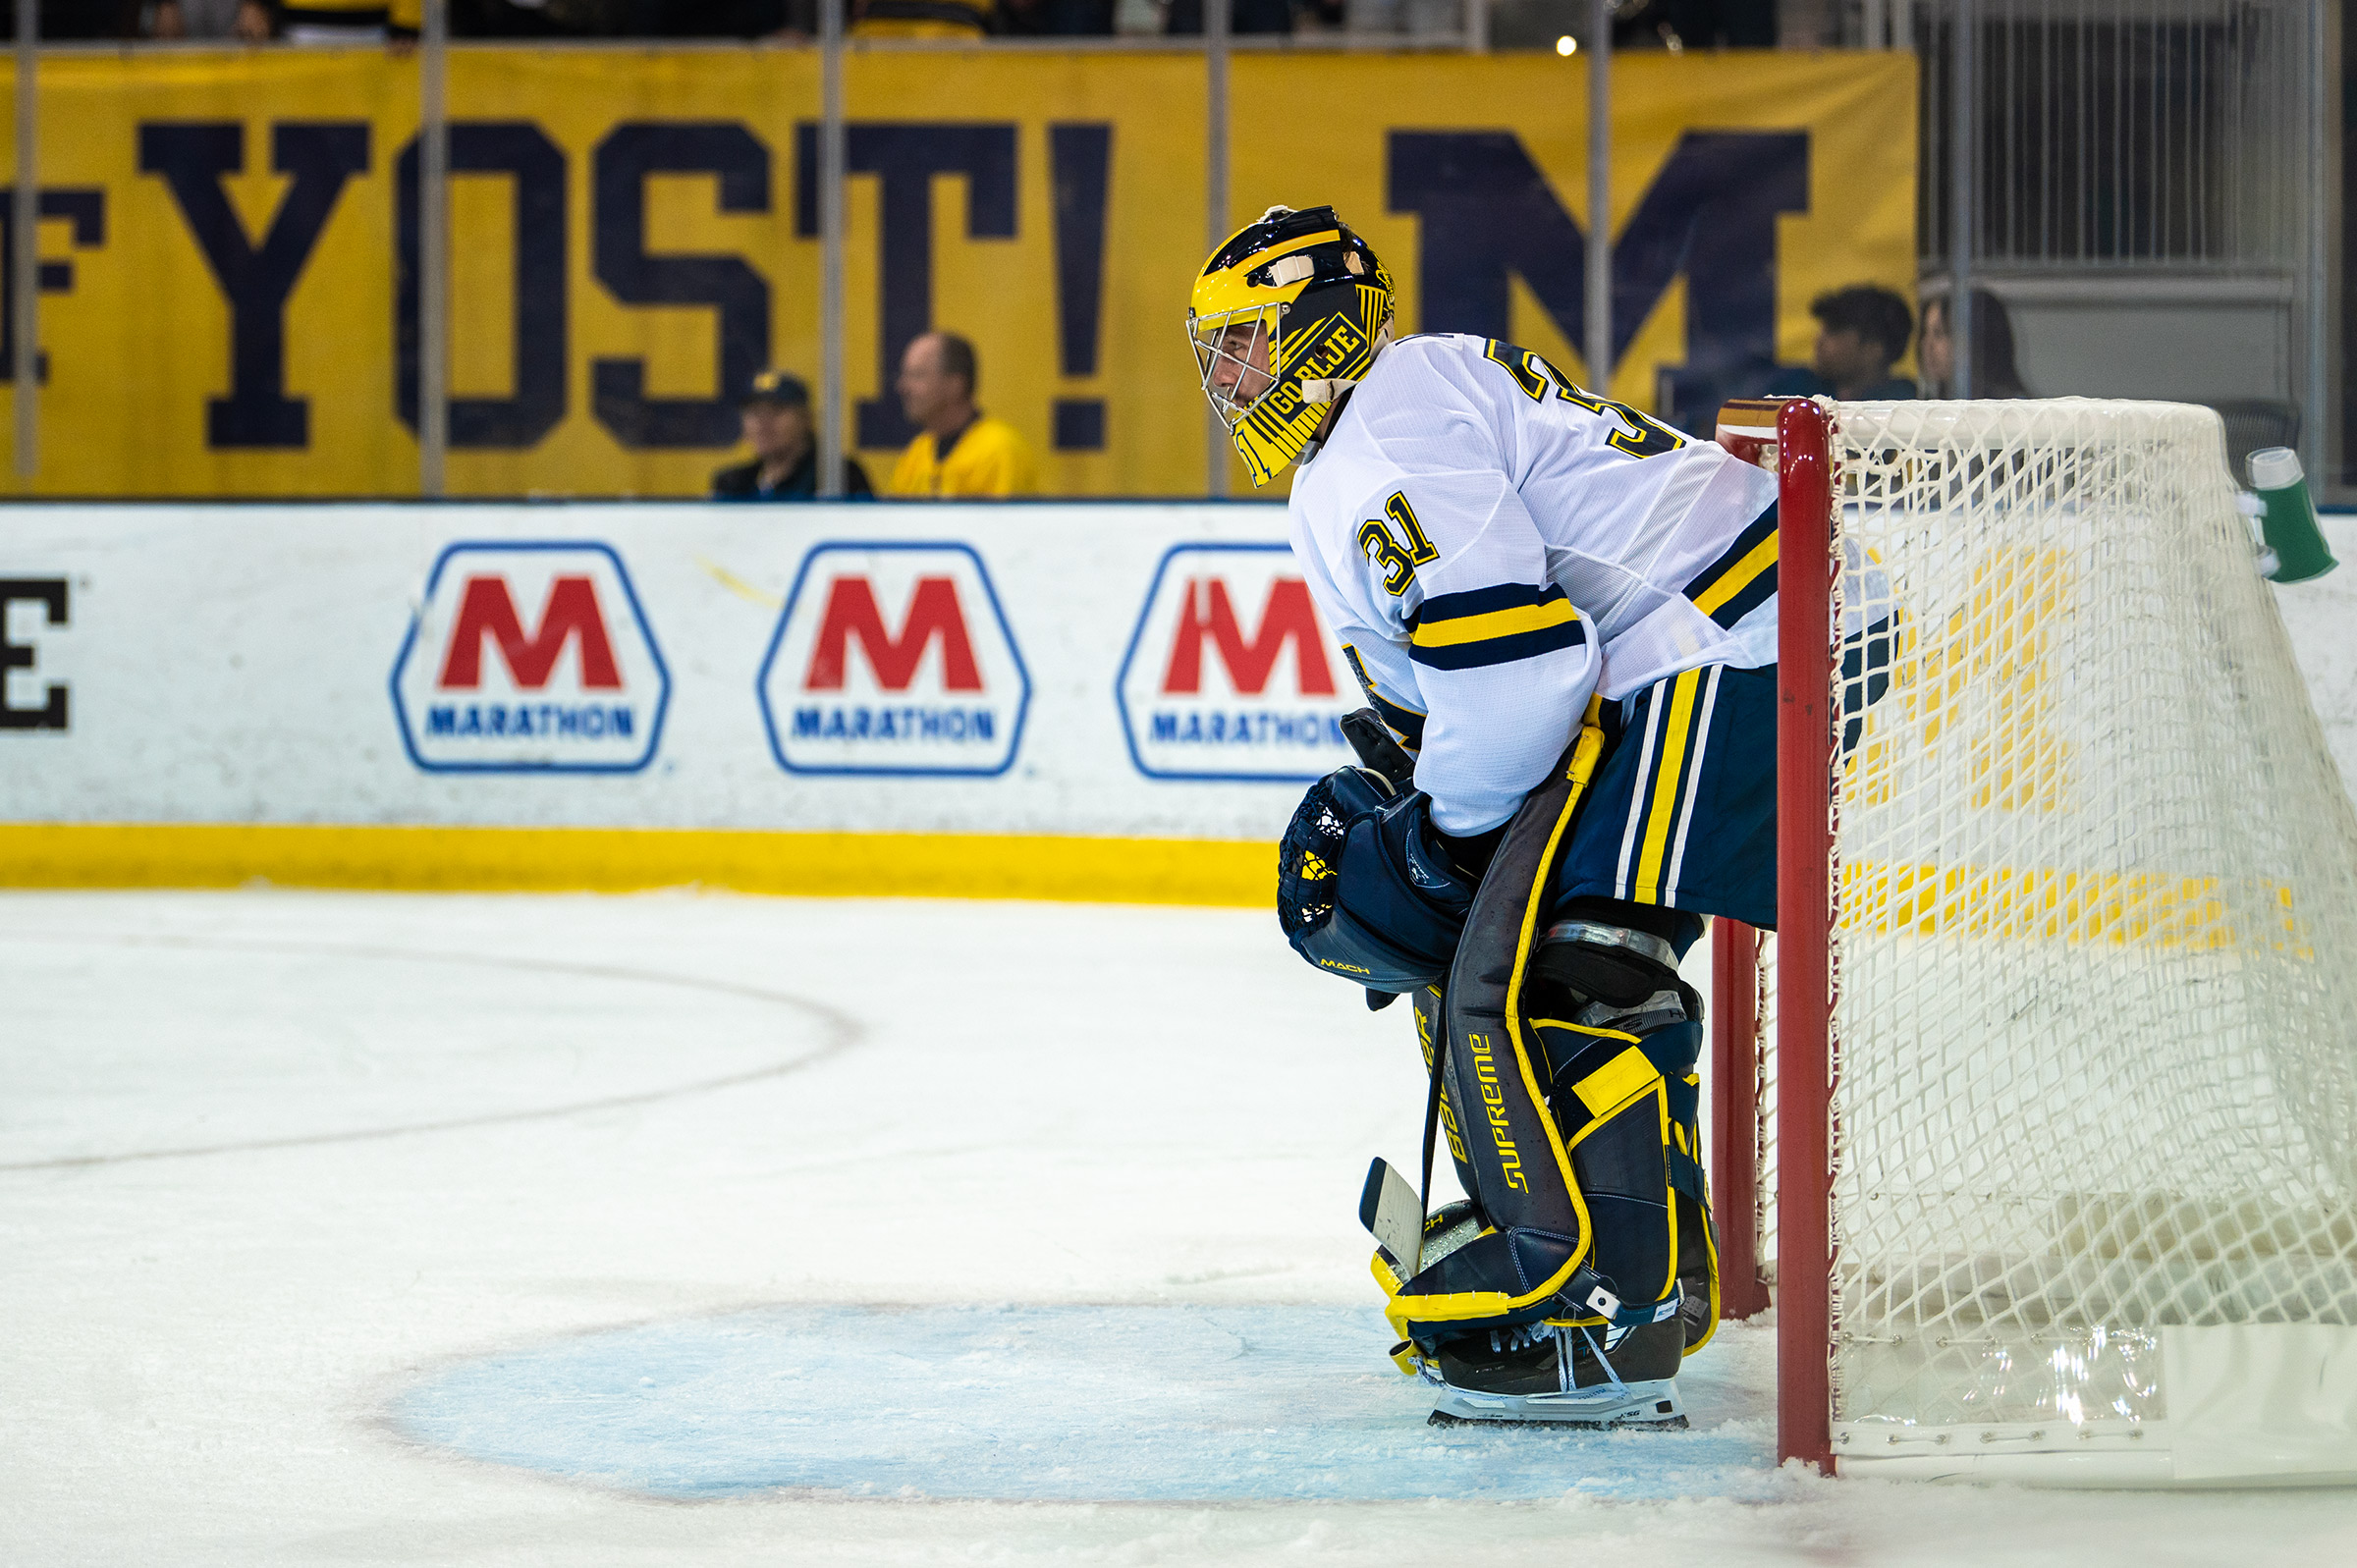 Wests first starts for Michigan hockey show confidence in backup